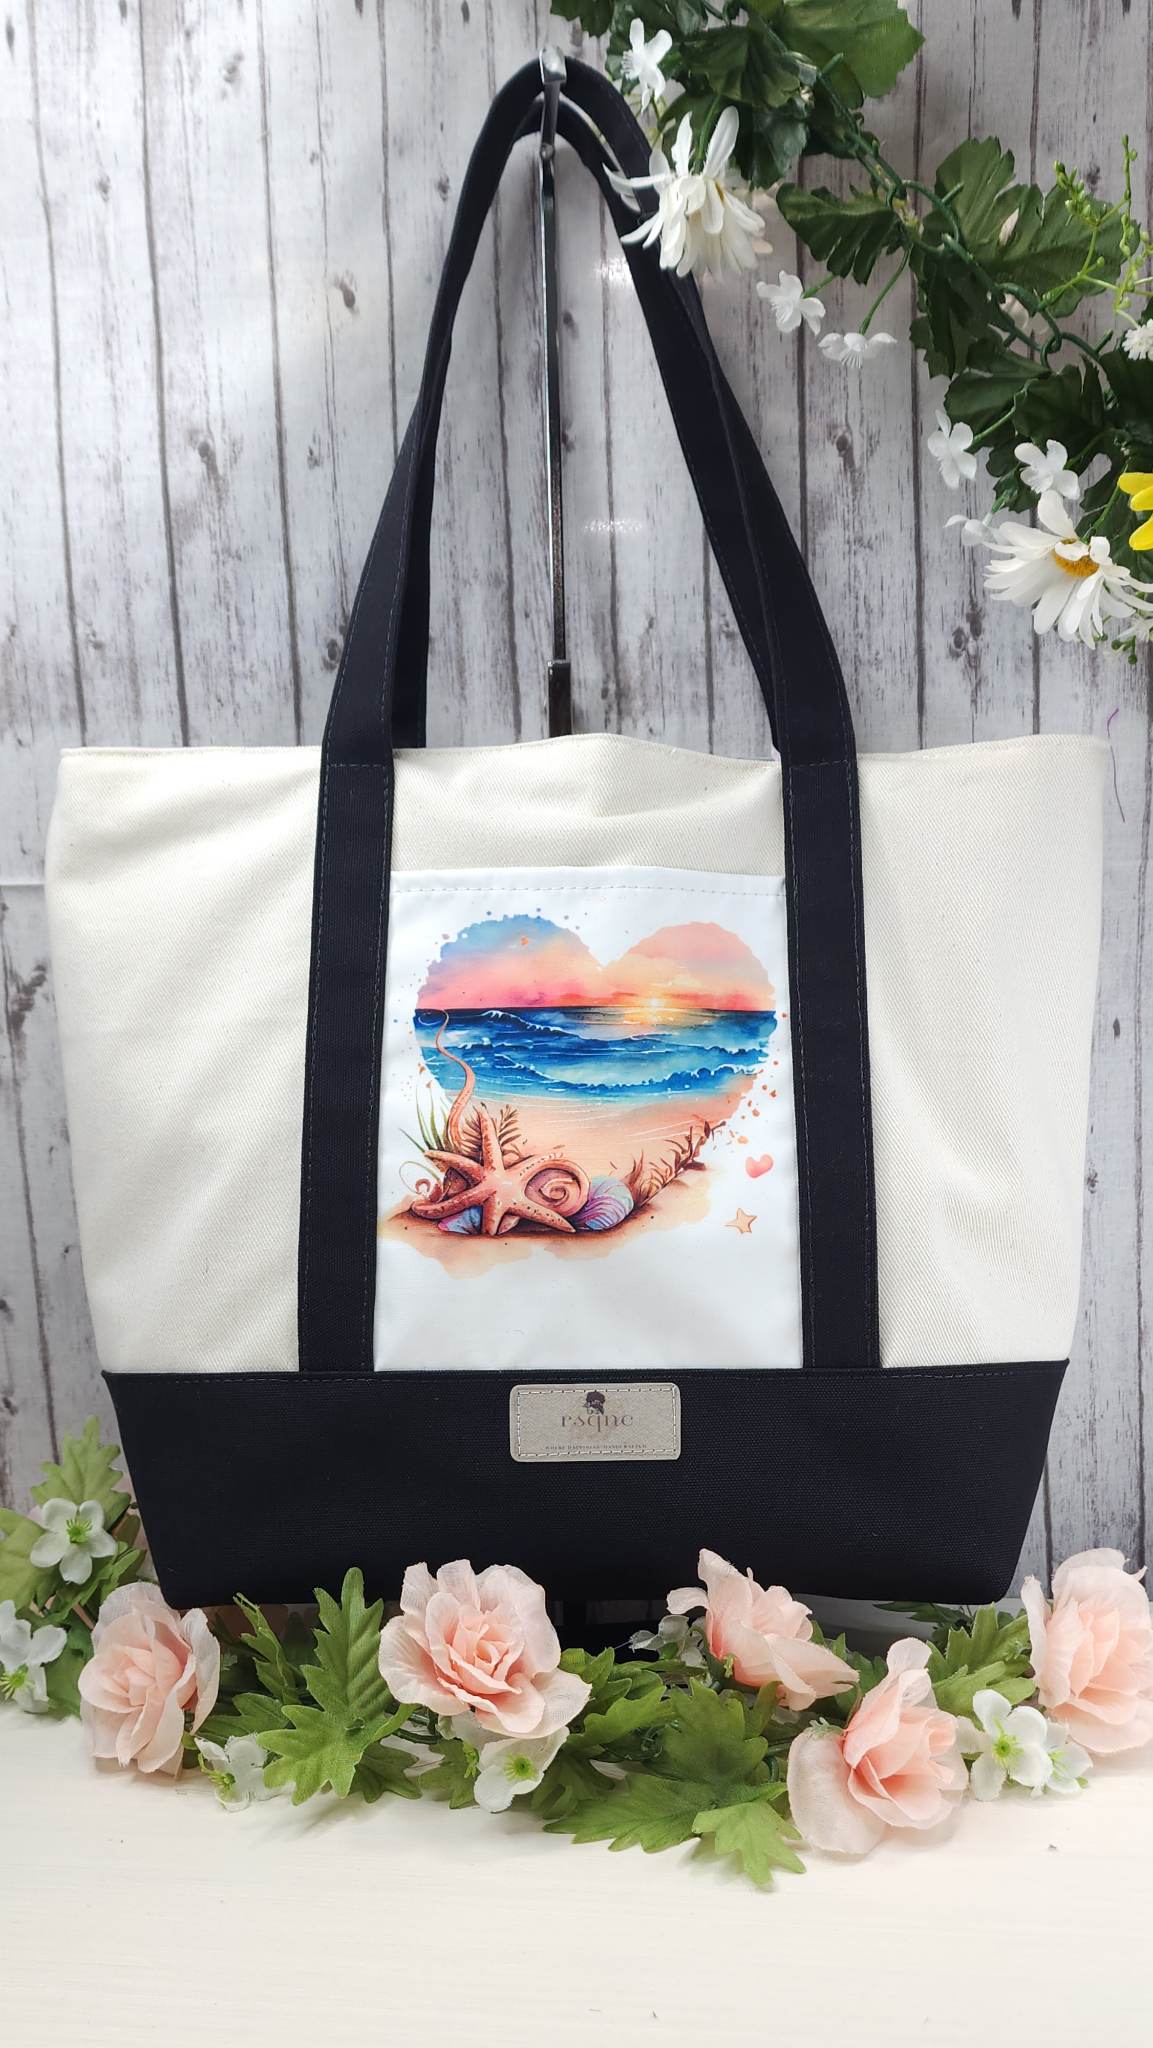 Be your own kind of beautiful Sublimation Tote Bag